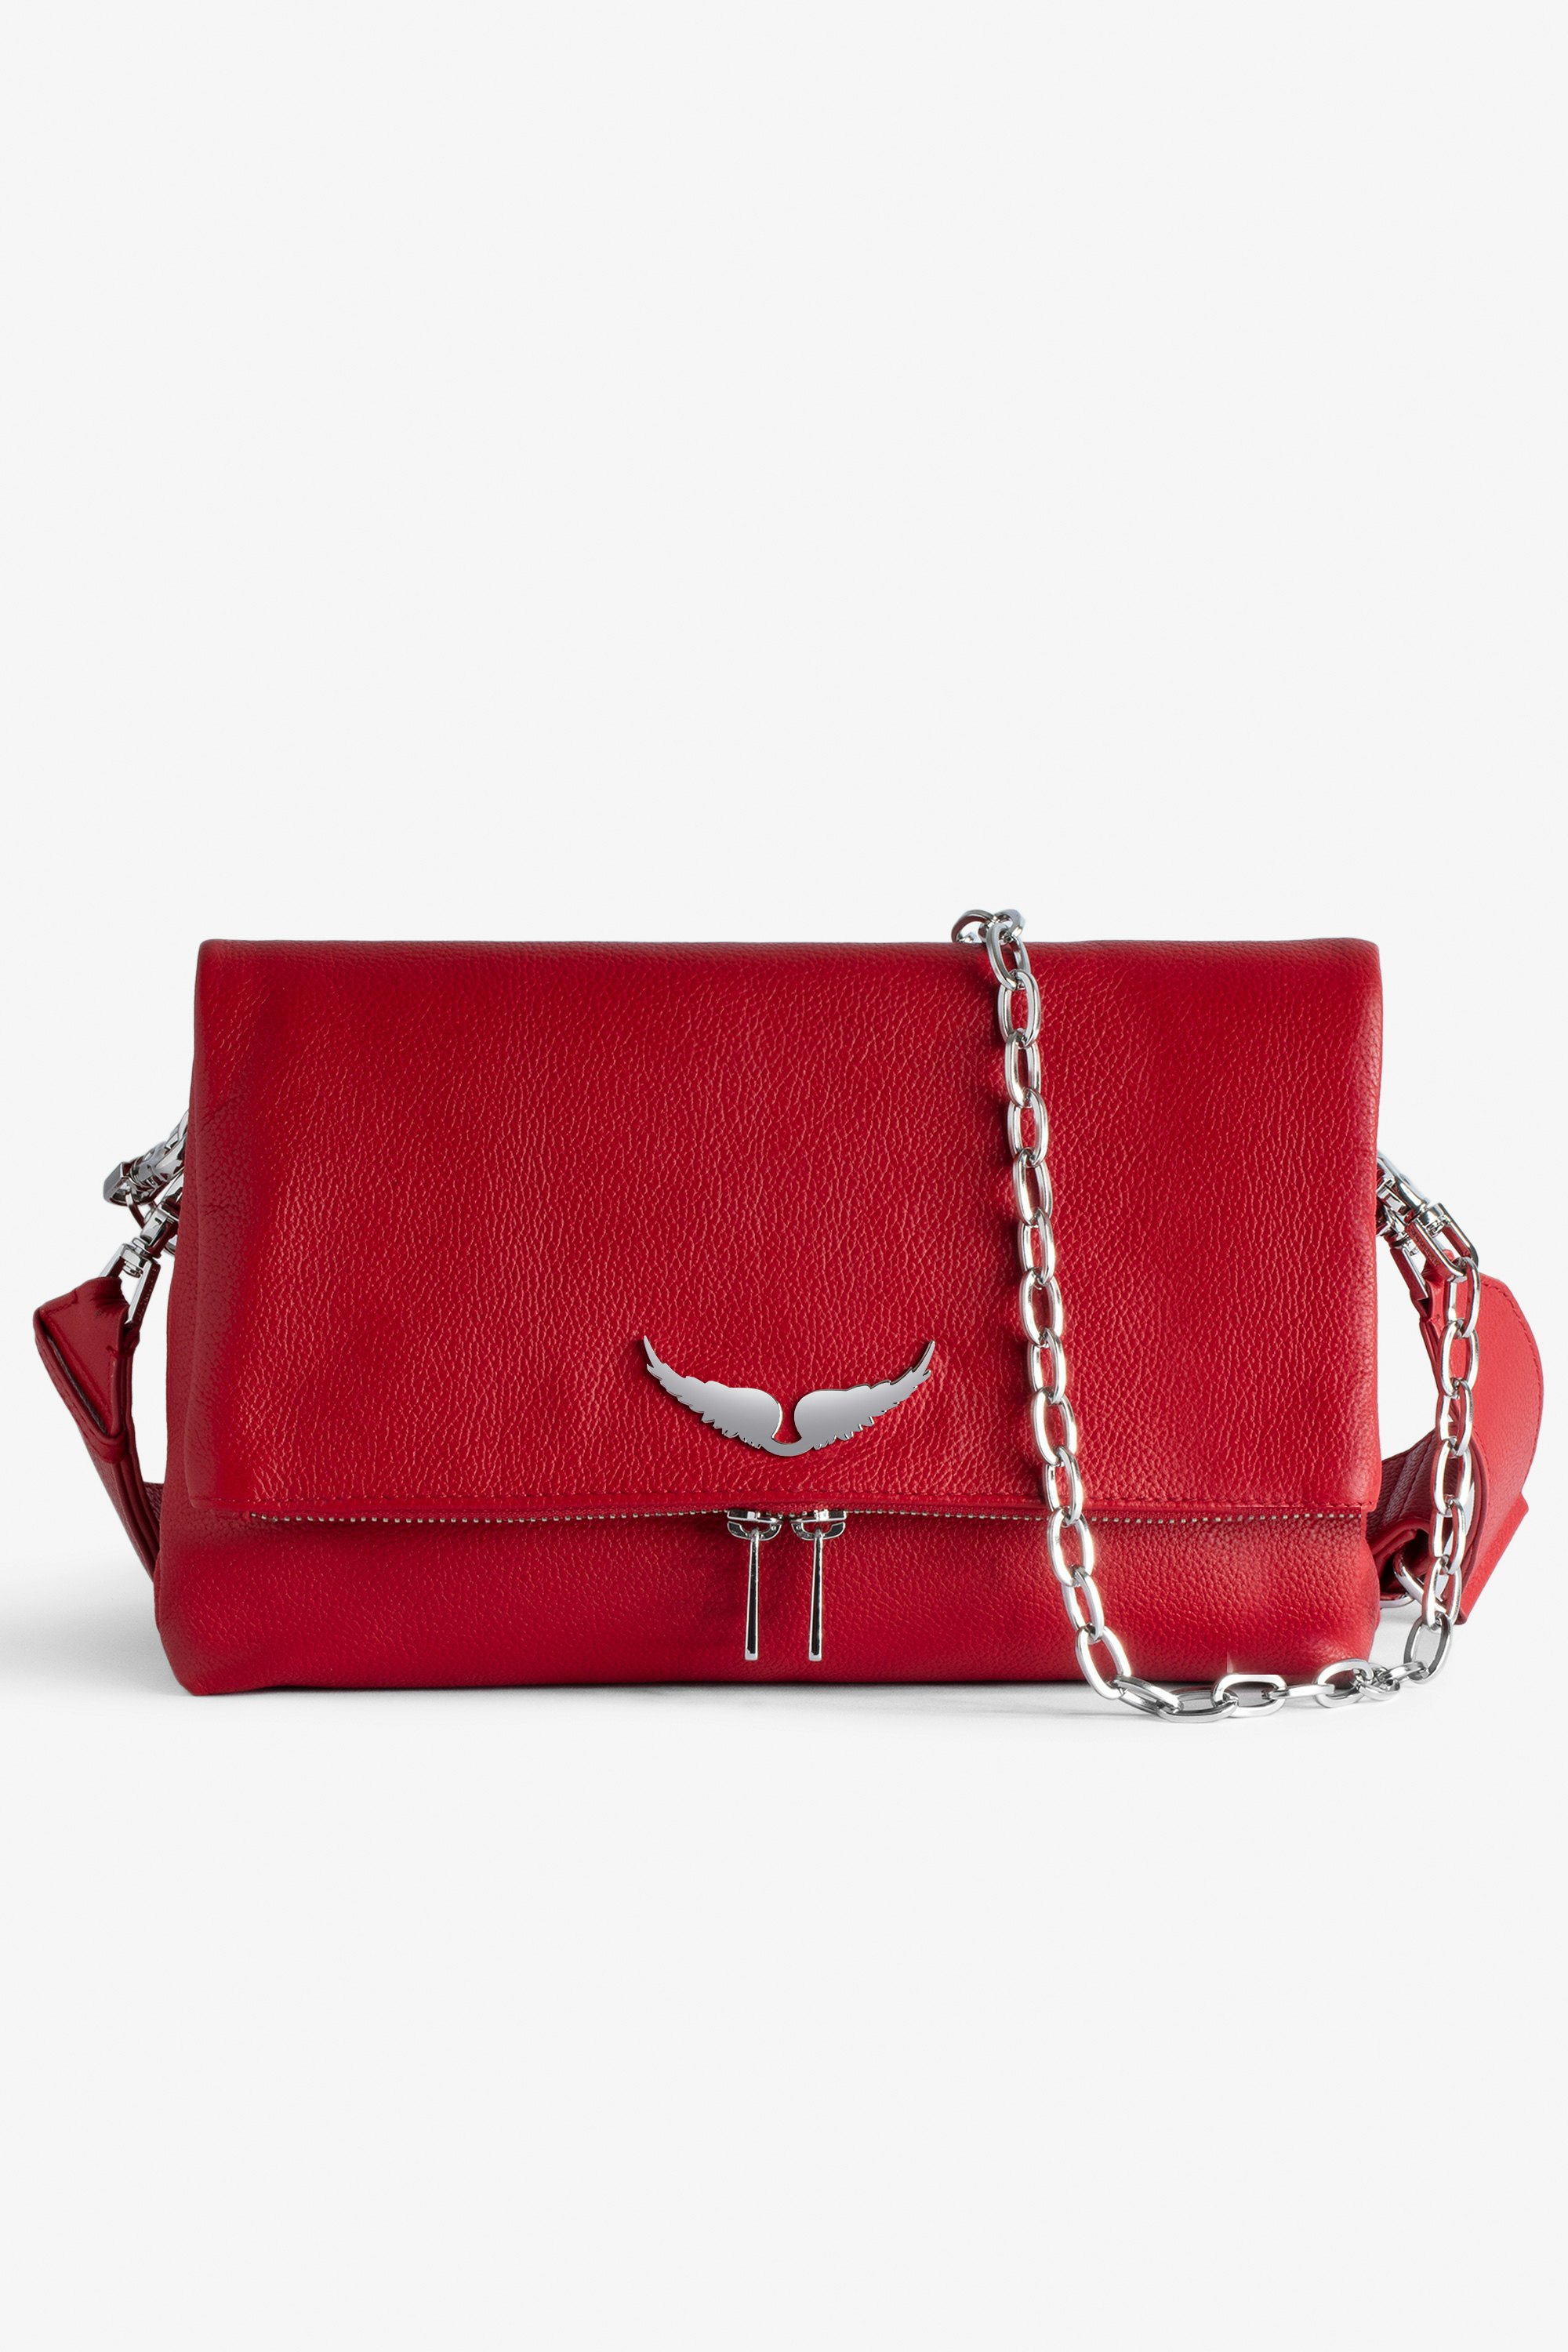 Rocky バッグ Women’s red grained leather bag with shoulder strap and wings charm